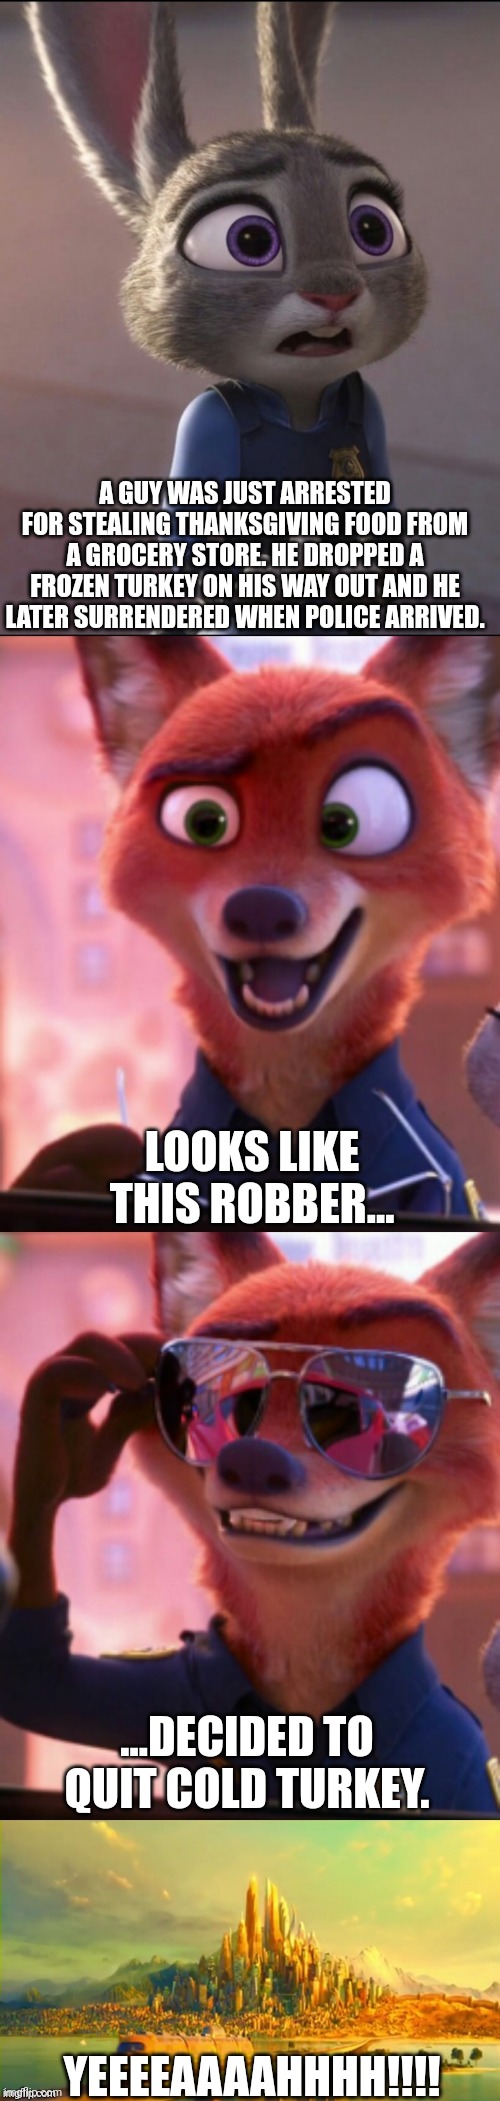 CSI: Zootopia 38 | A GUY WAS JUST ARRESTED FOR STEALING THANKSGIVING FOOD FROM A GROCERY STORE. HE DROPPED A FROZEN TURKEY ON HIS WAY OUT AND HE LATER SURRENDERED WHEN POLICE ARRIVED. LOOKS LIKE THIS ROBBER... ...DECIDED TO QUIT COLD TURKEY. YEEEEAAAAHHHH!!!! | image tagged in csi zootopia,zootopia,judy hopps,nick wilde,parody,funny | made w/ Imgflip meme maker